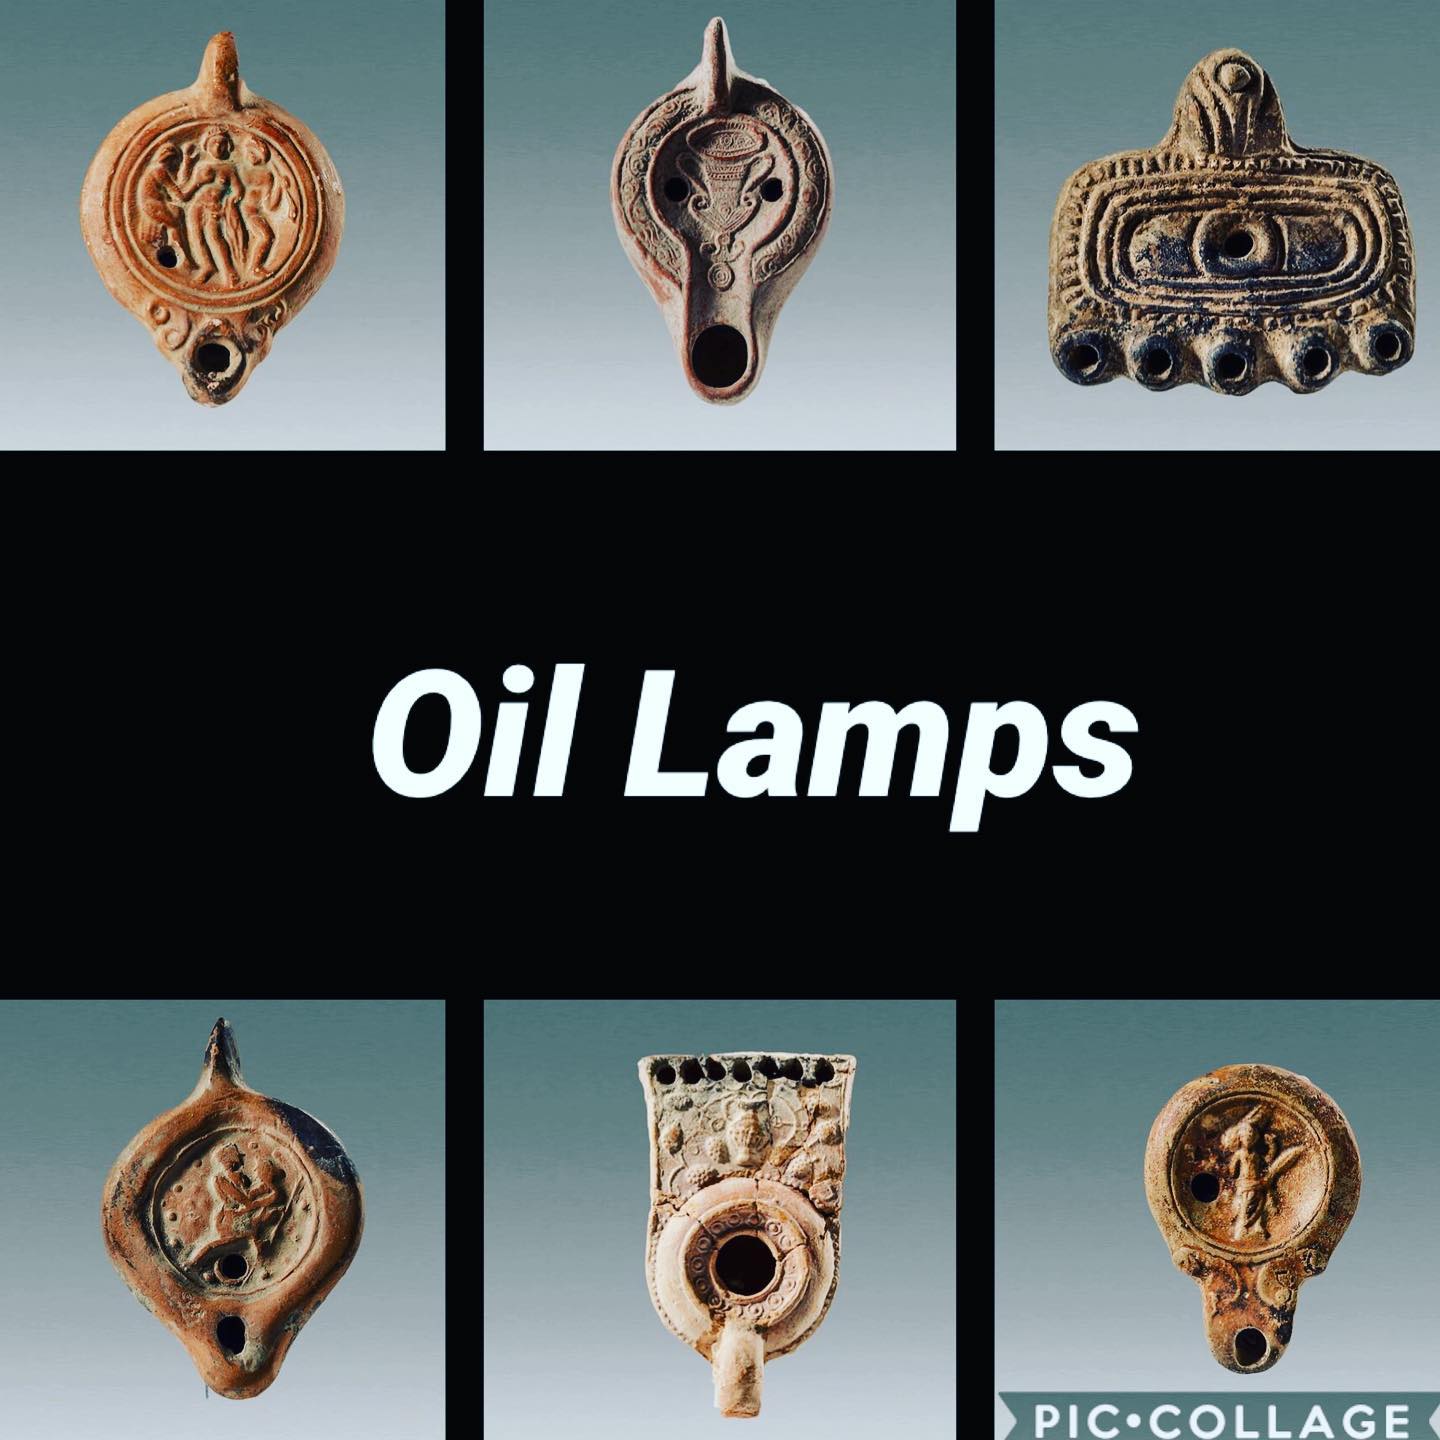 4 ancient oil lamps - at the Manhattan Art & Antiques Center